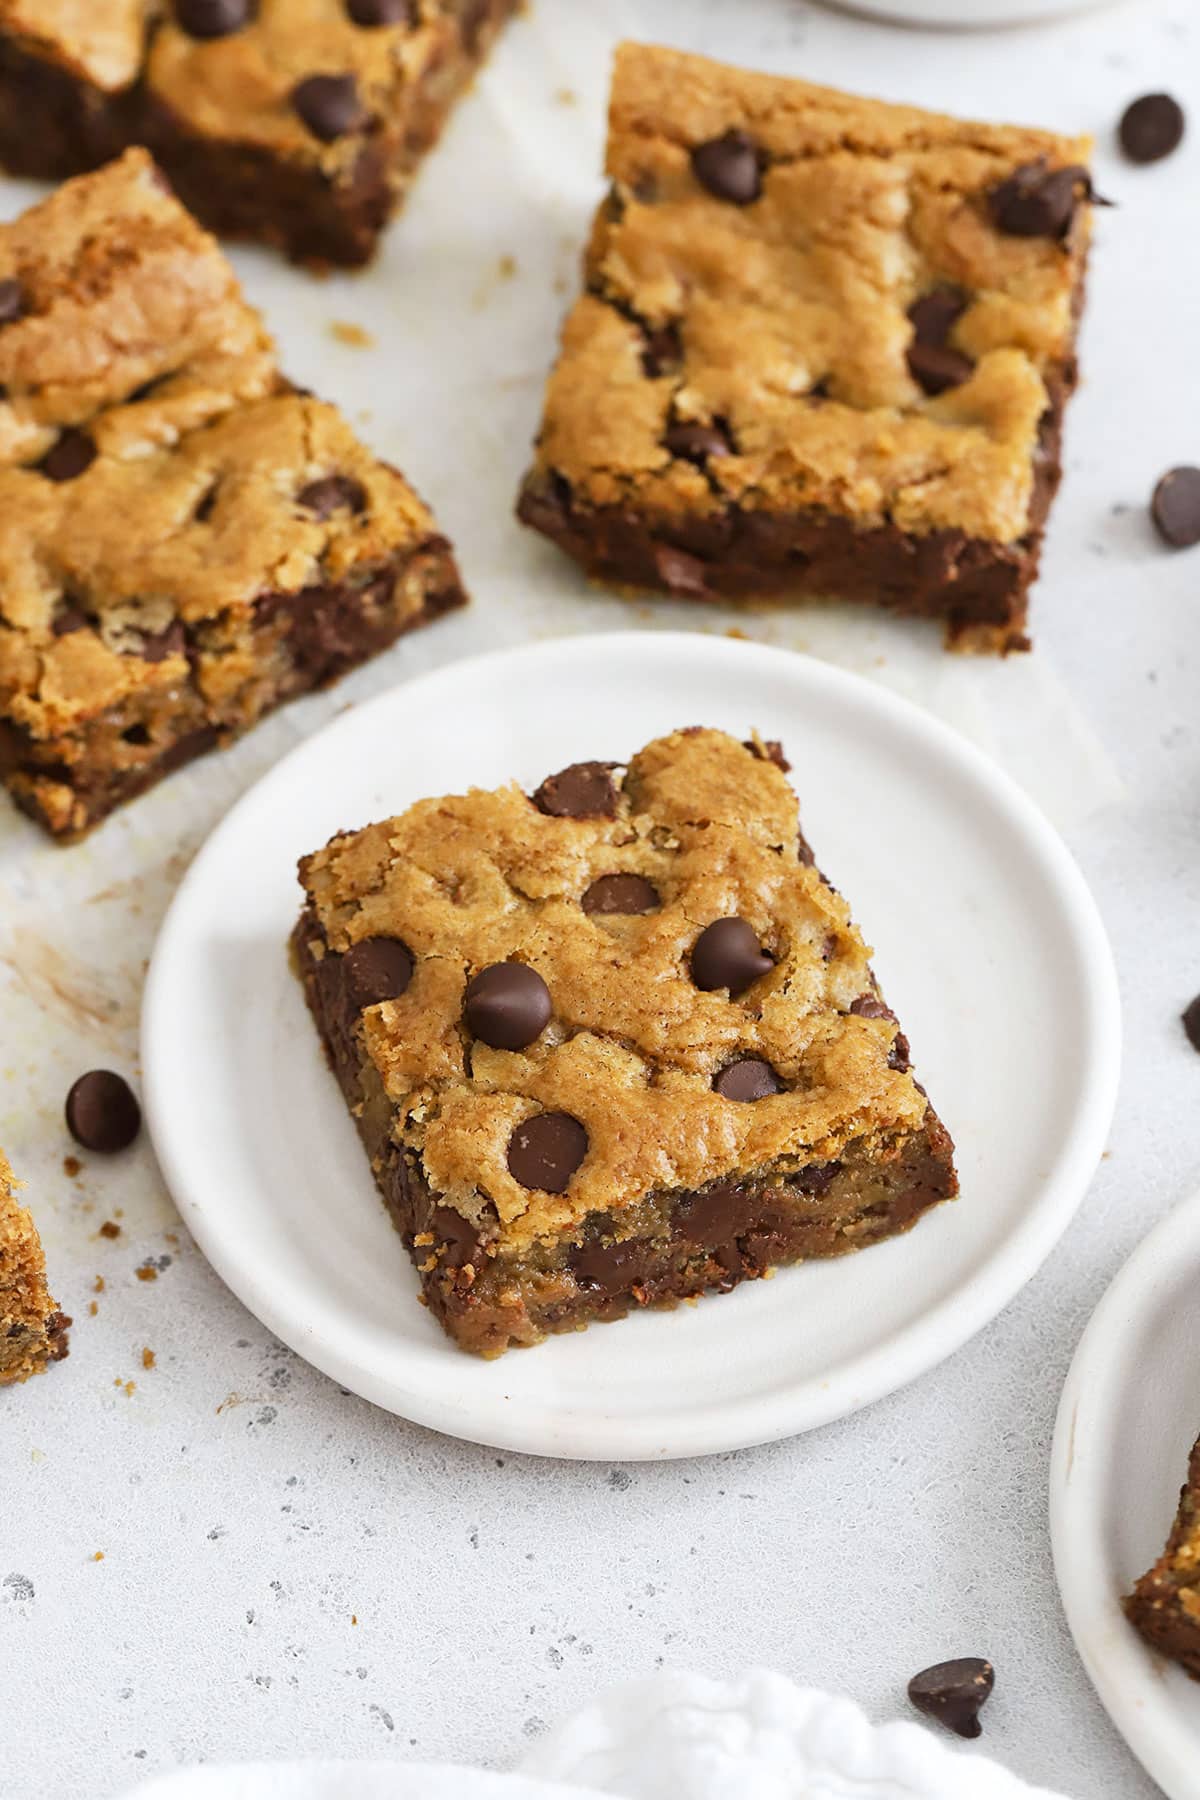 Gluten-free chocolate chip cookie bars cut into squares